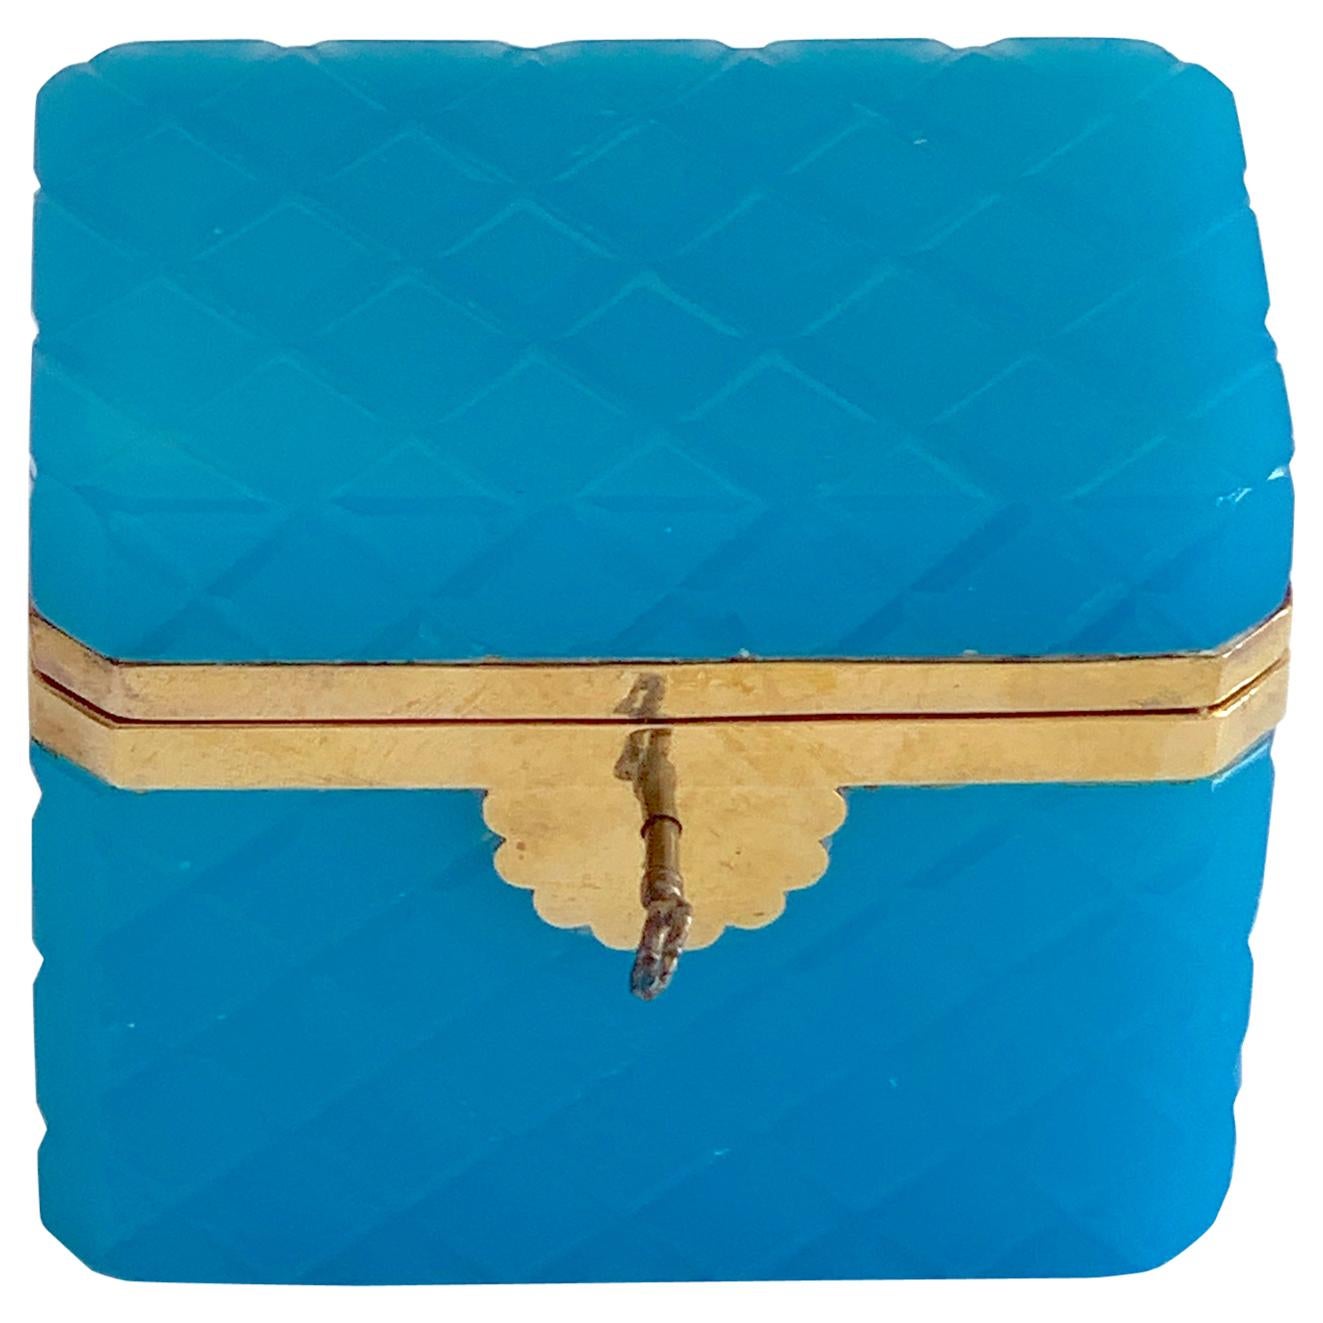 Exquisite Cut Blue Opaline Box, with Key